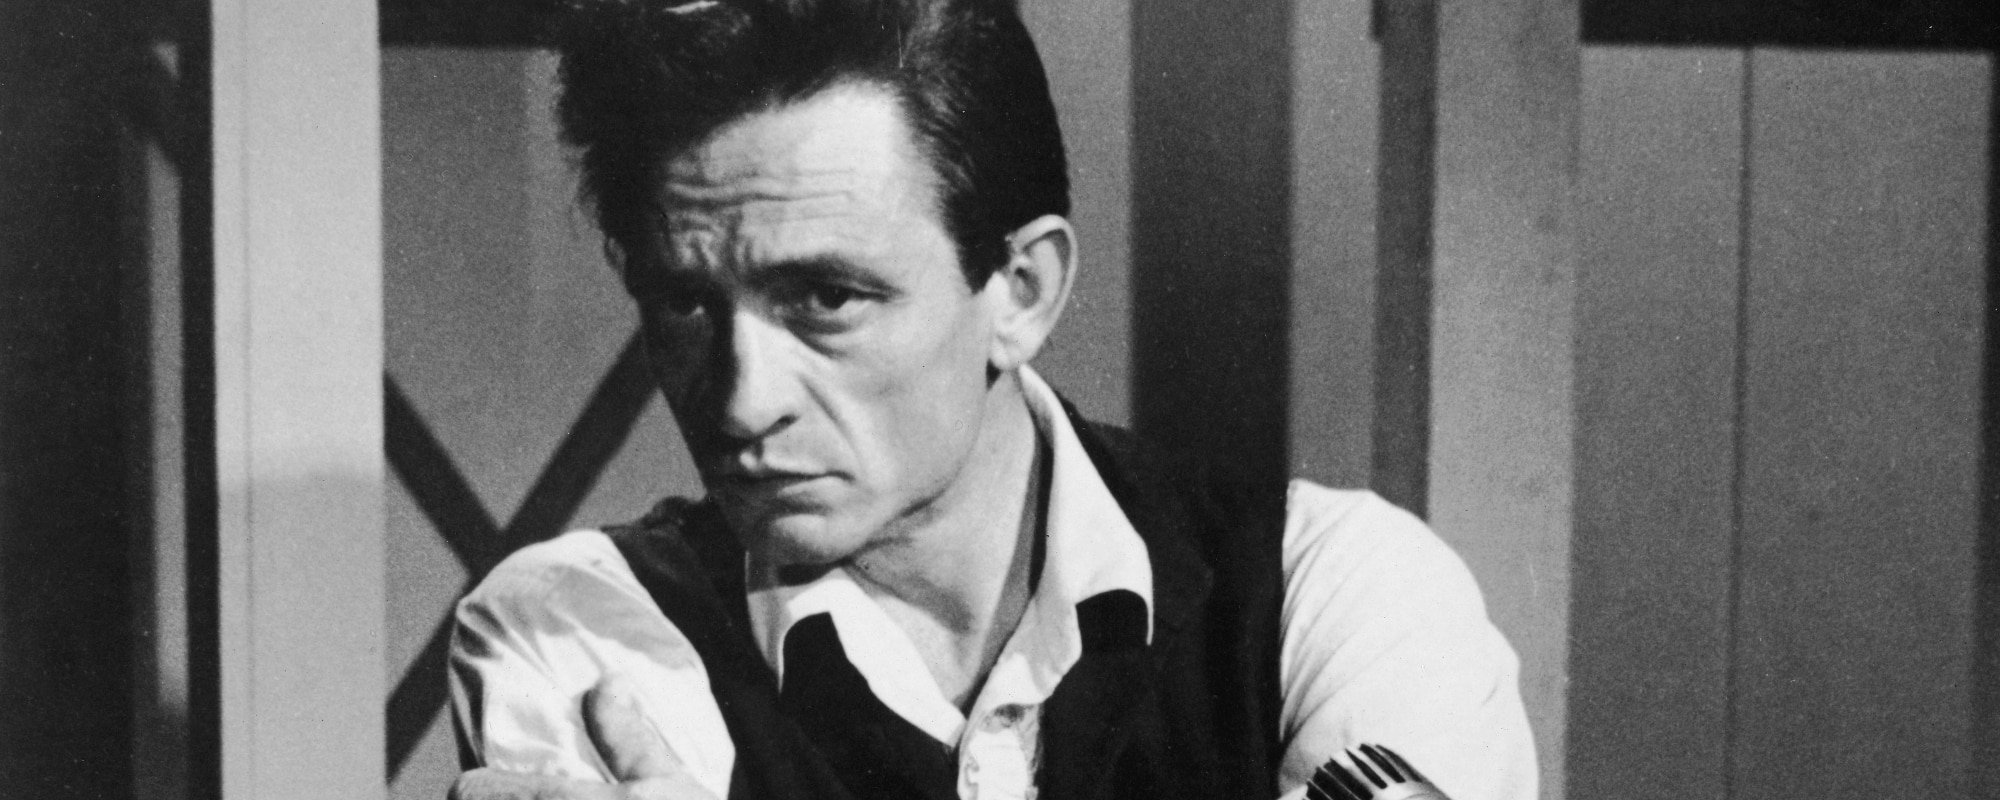 Behind The Song: "A Boy Named Sue" by Johnny Cash